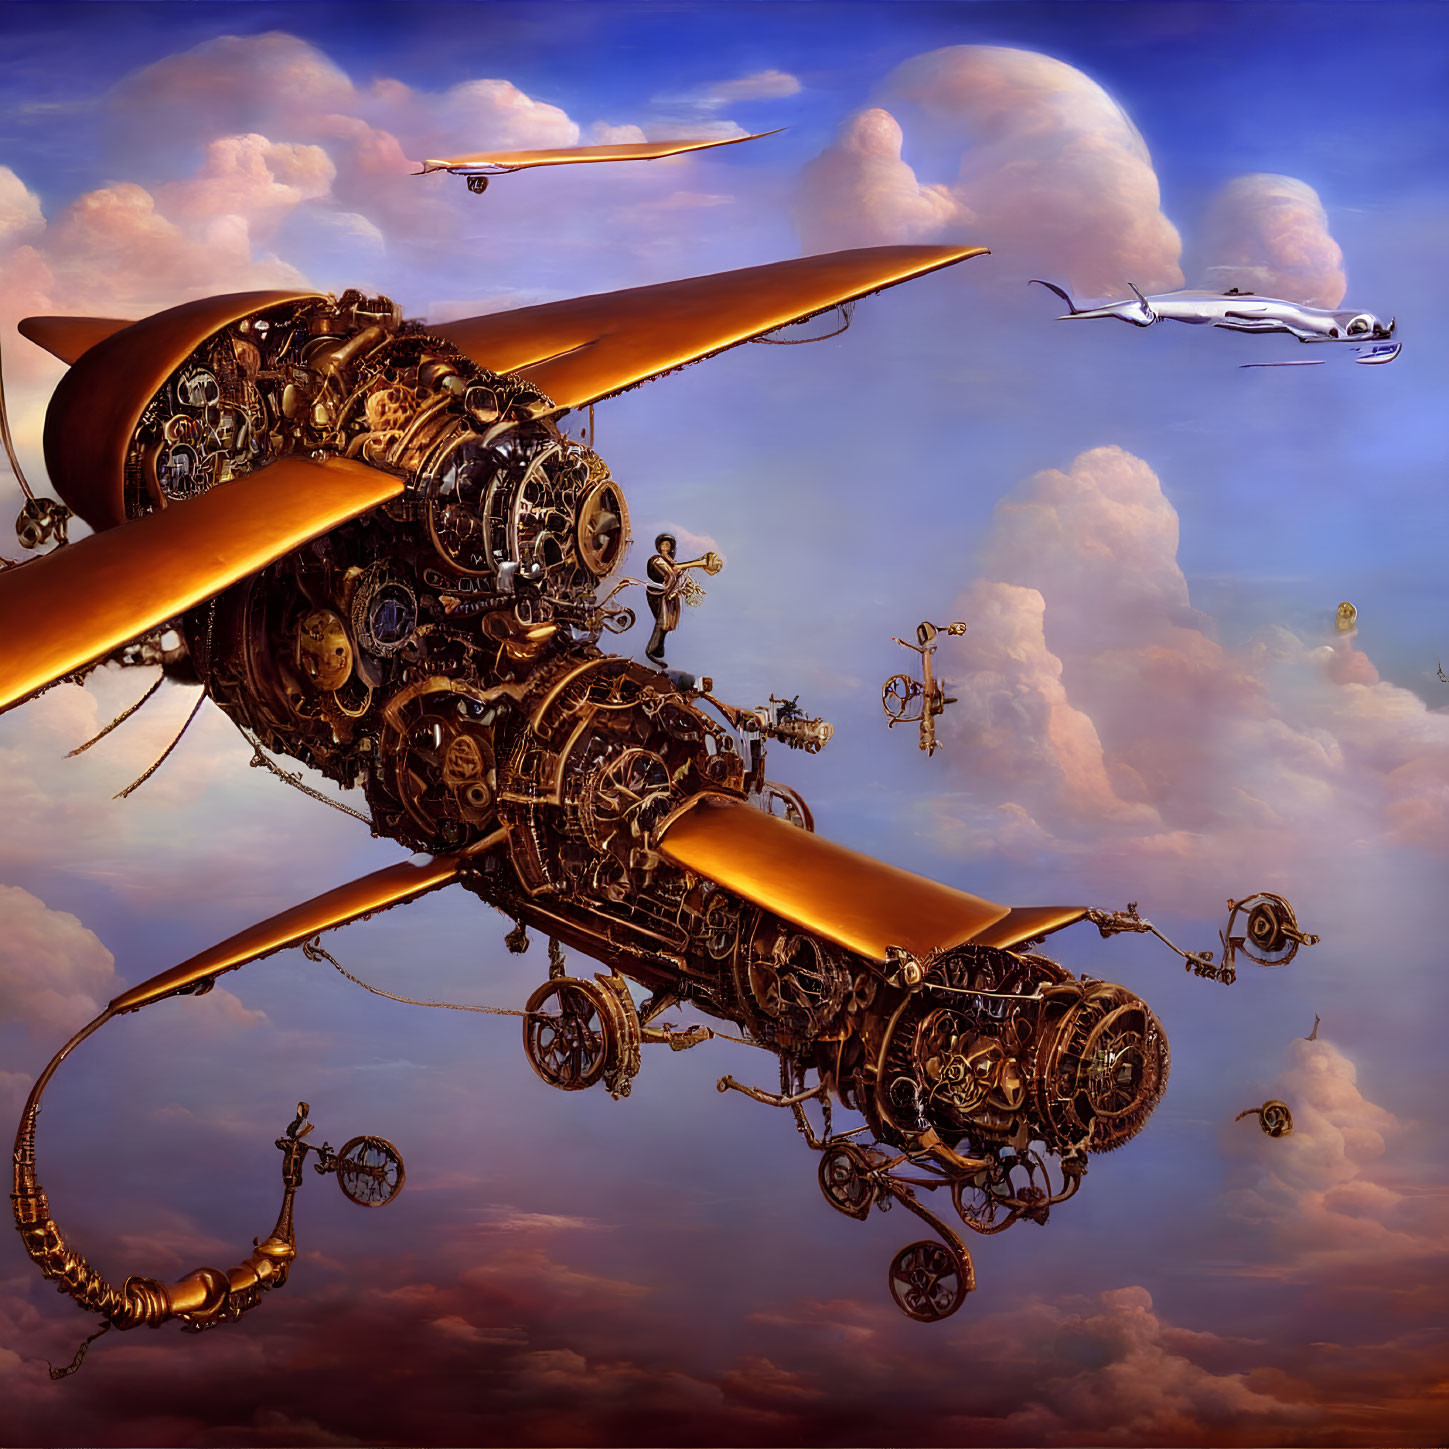 Steampunk-style flying machine among whimsical airborne contraptions in vibrant sky